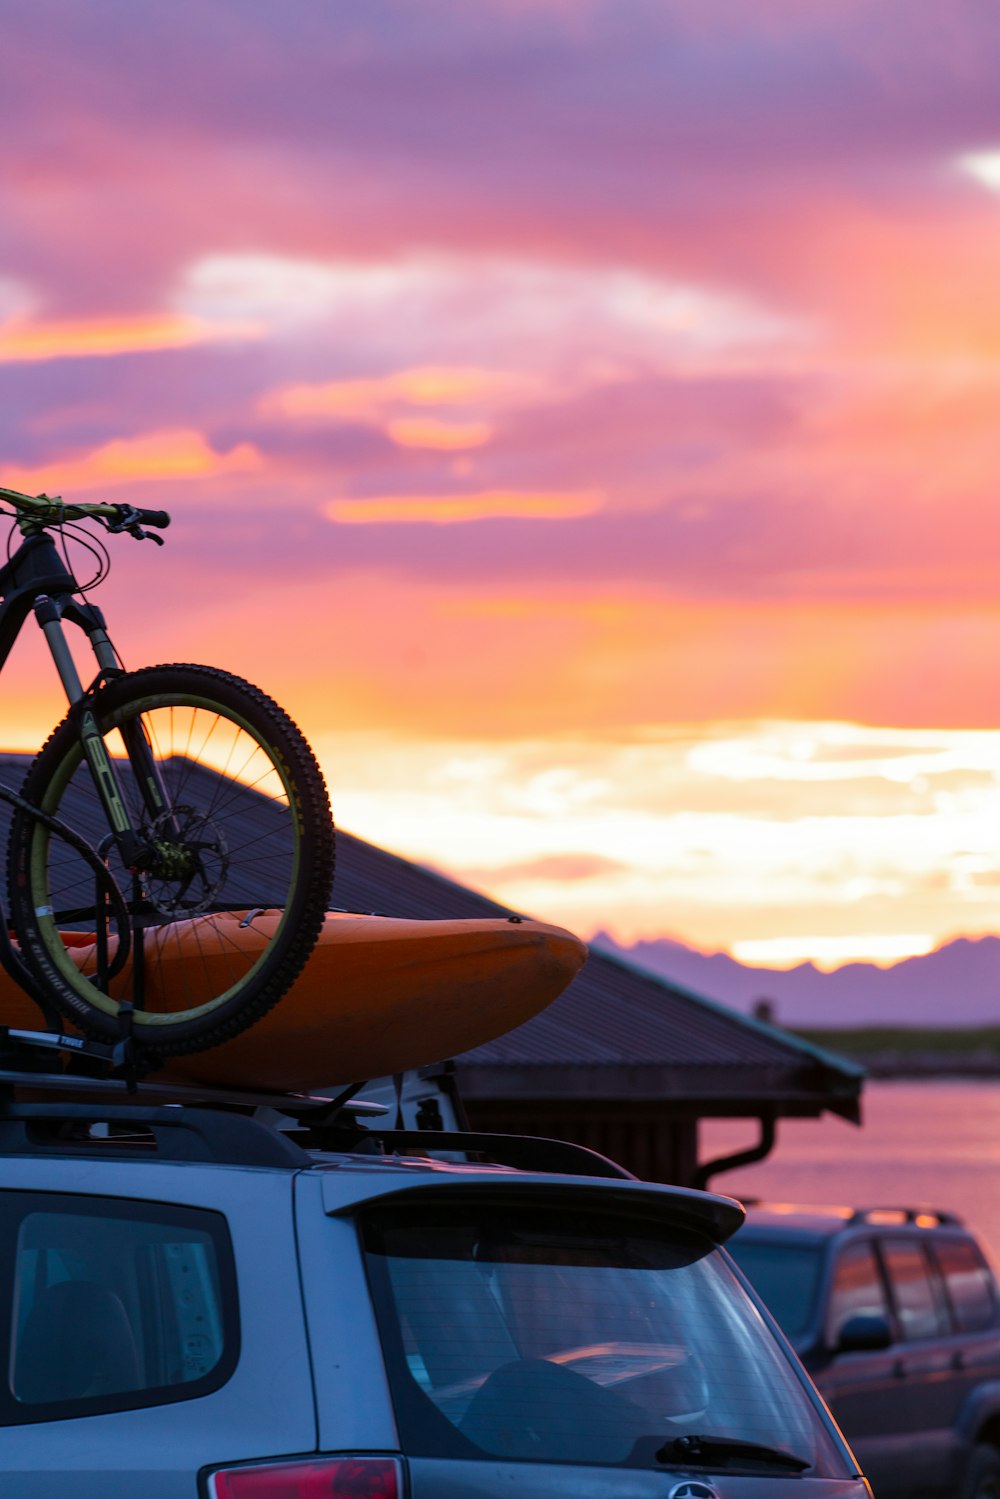 A bicycle on top of a boat photo – Free Norway Image on Unsplash